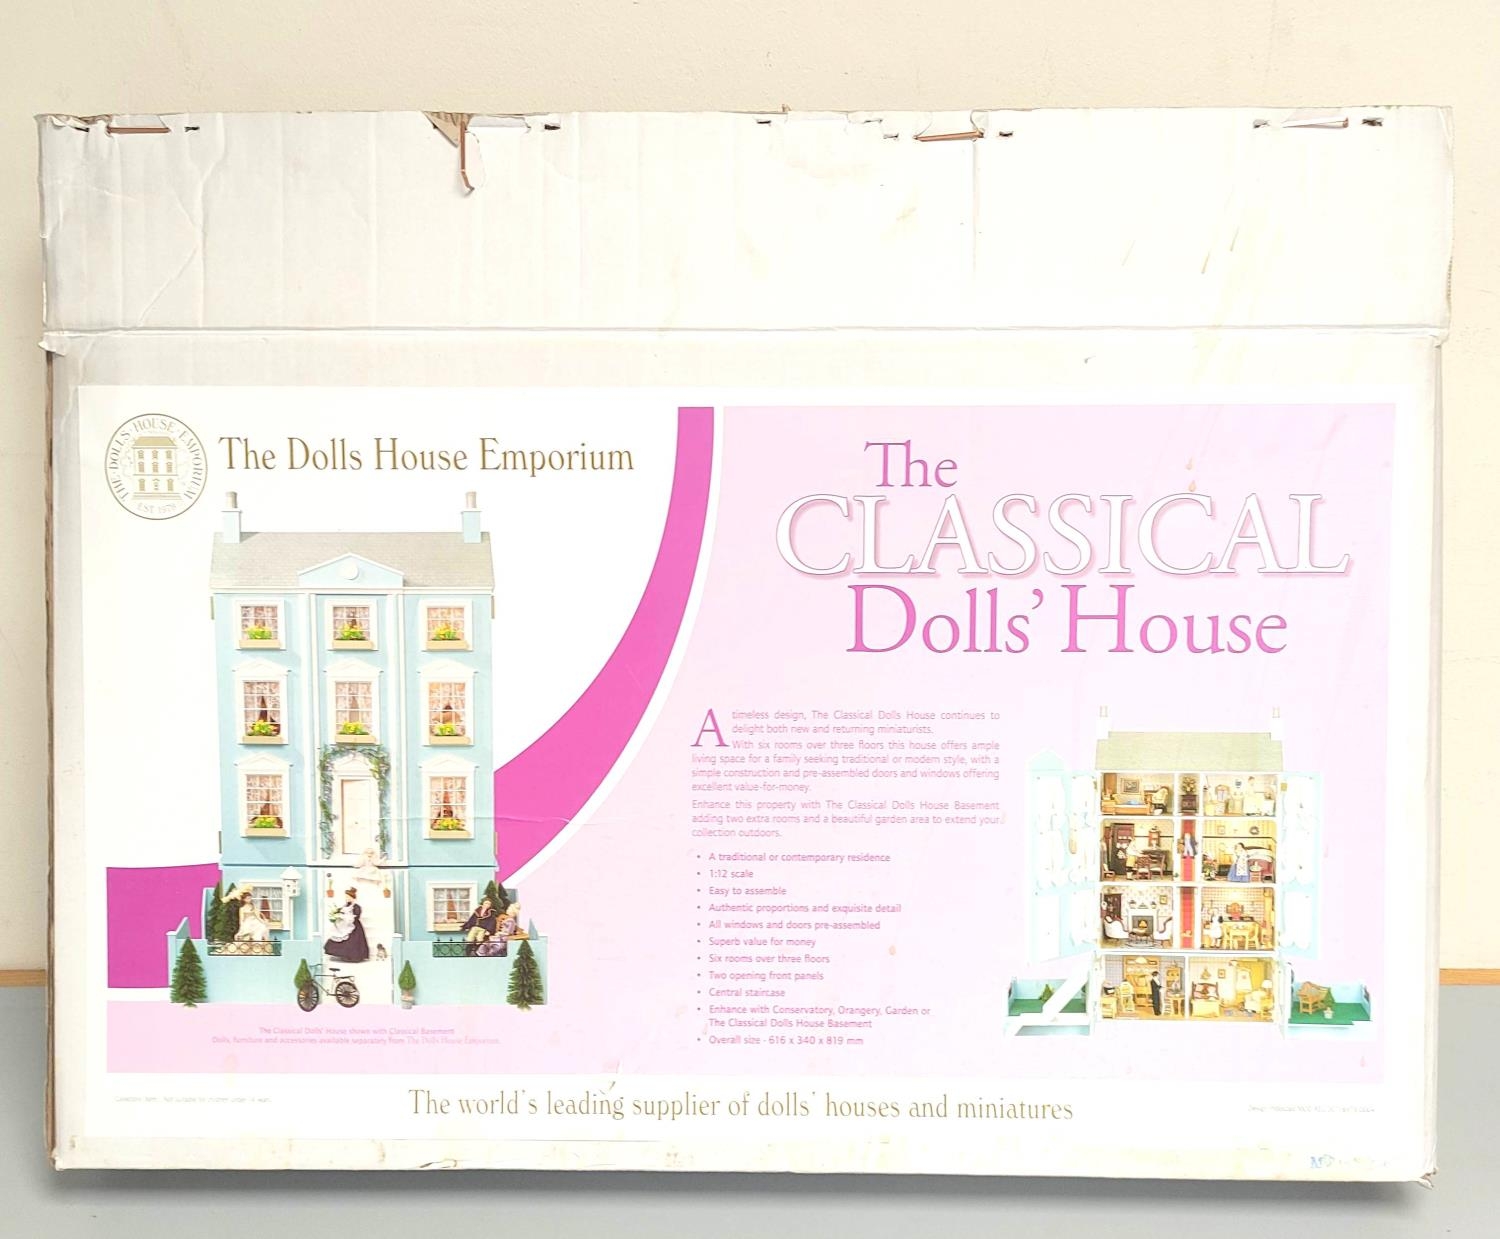 The Dolls House Emporium. The Classical Dolls House 1:12 scale model in original box.